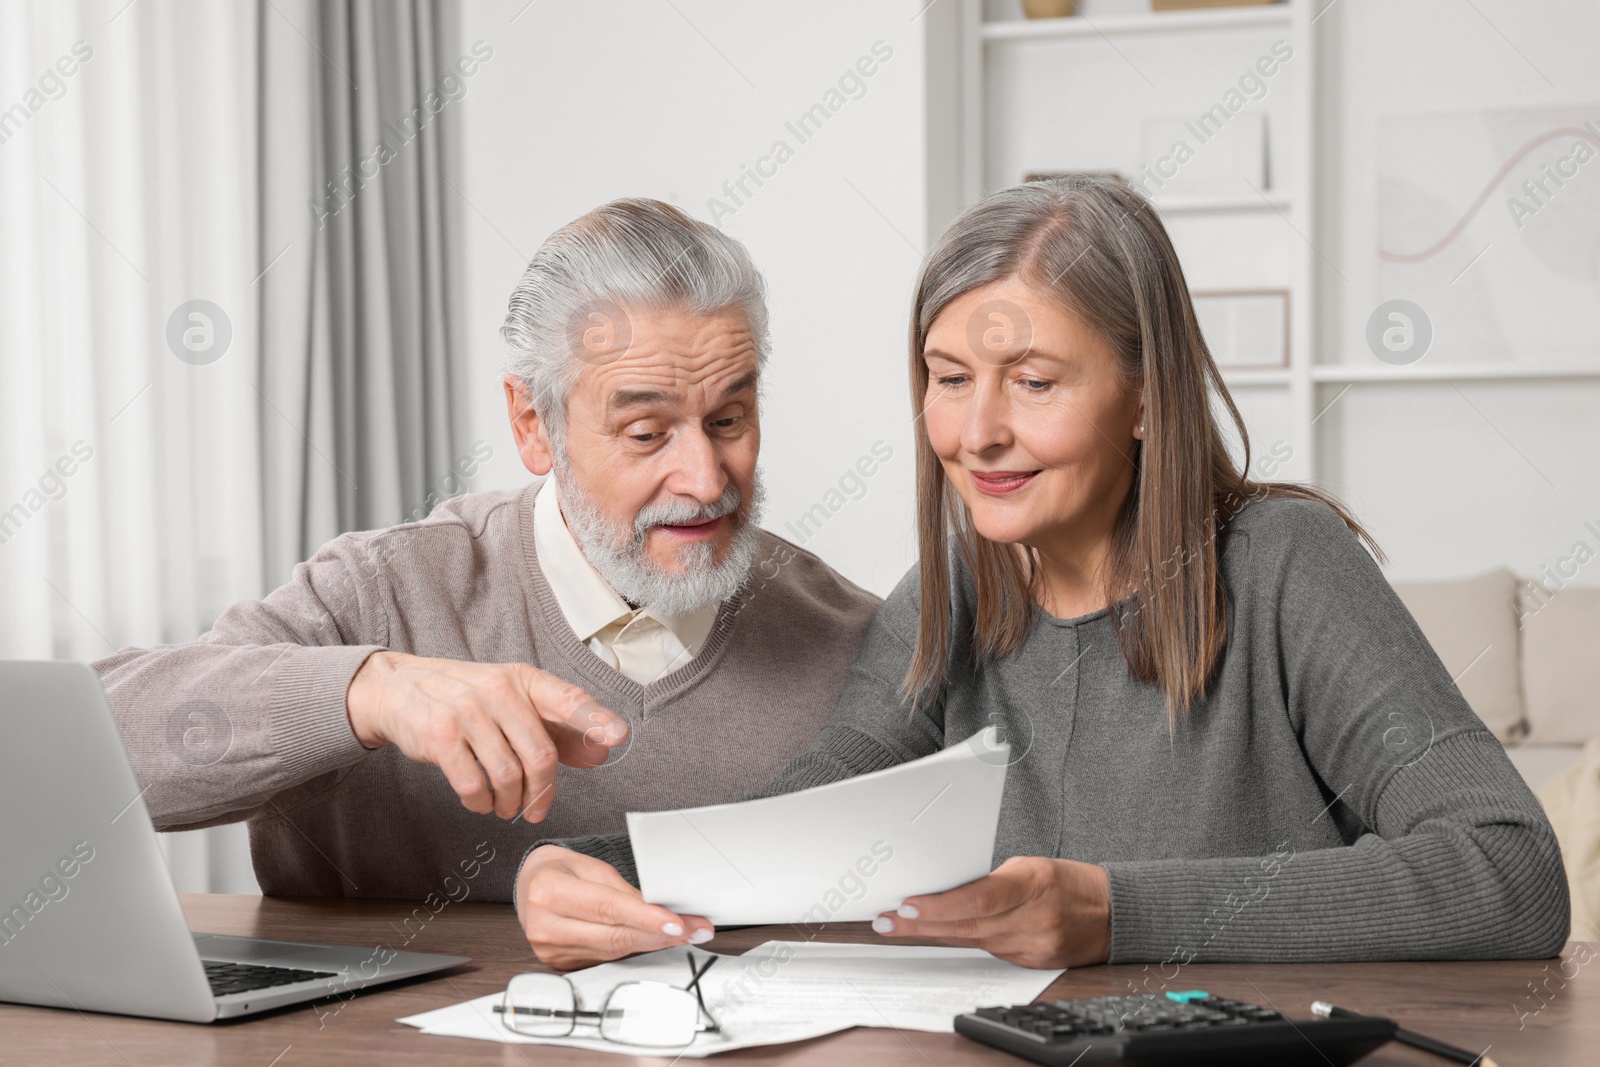 Photo of Elderly couple with papers and laptop discussing pension plan at wooden table in room